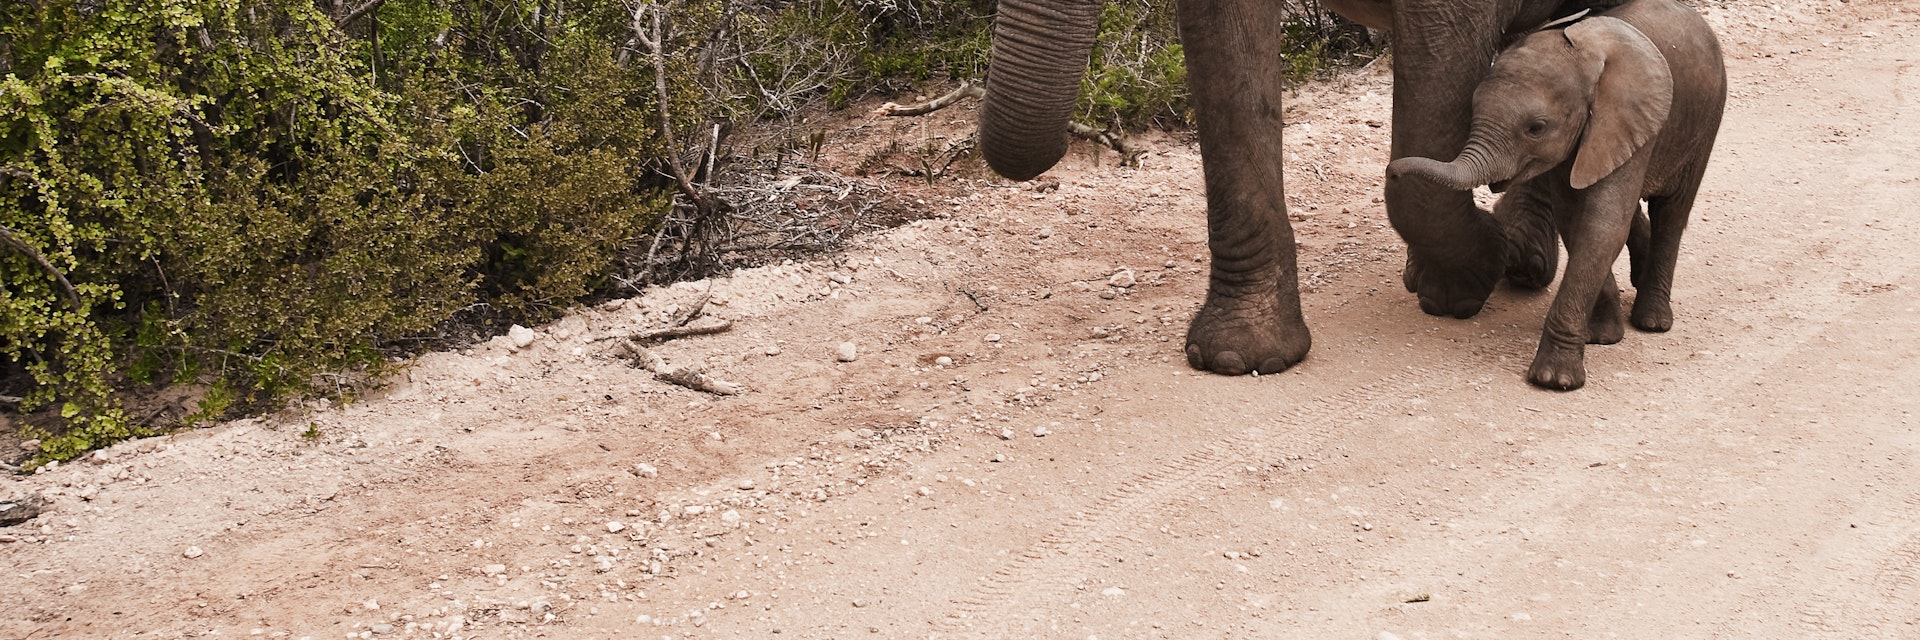 Elephant cow and calf walking on gravel road.